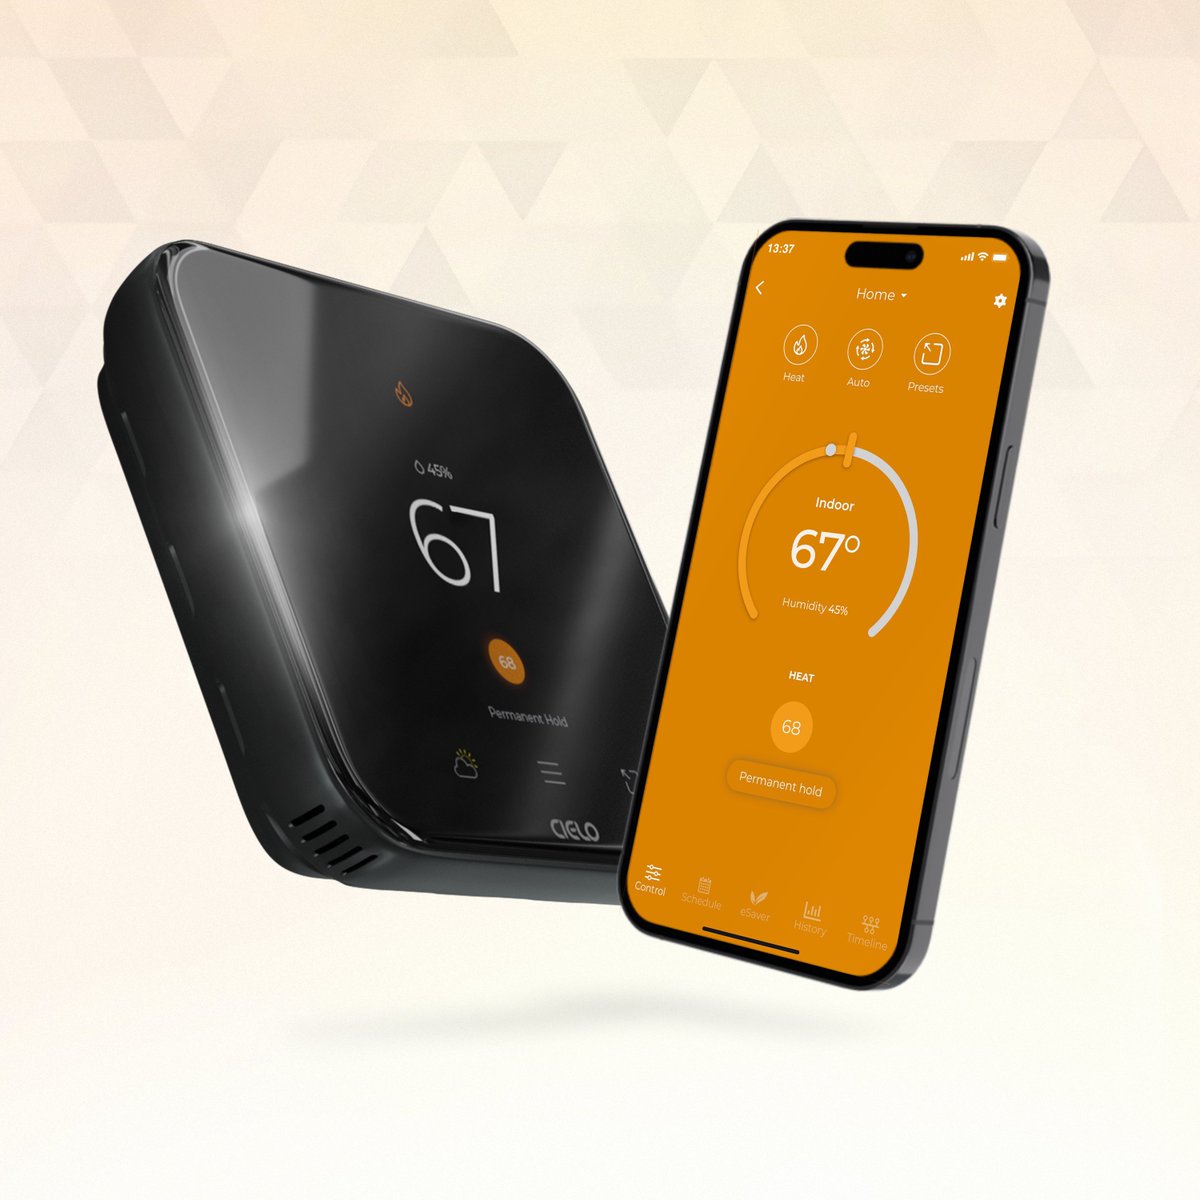 Get ready for the colder months ahead: Make your home climate smart with Cielo Smart Thermostat! Monitor and control your home comfort from anywhere using the free Cielo Home app. Stay cozy and save energy: cielowigle.com/cielo-smart-th… #CieloSmartThermostat #ClimateControl #HVAC